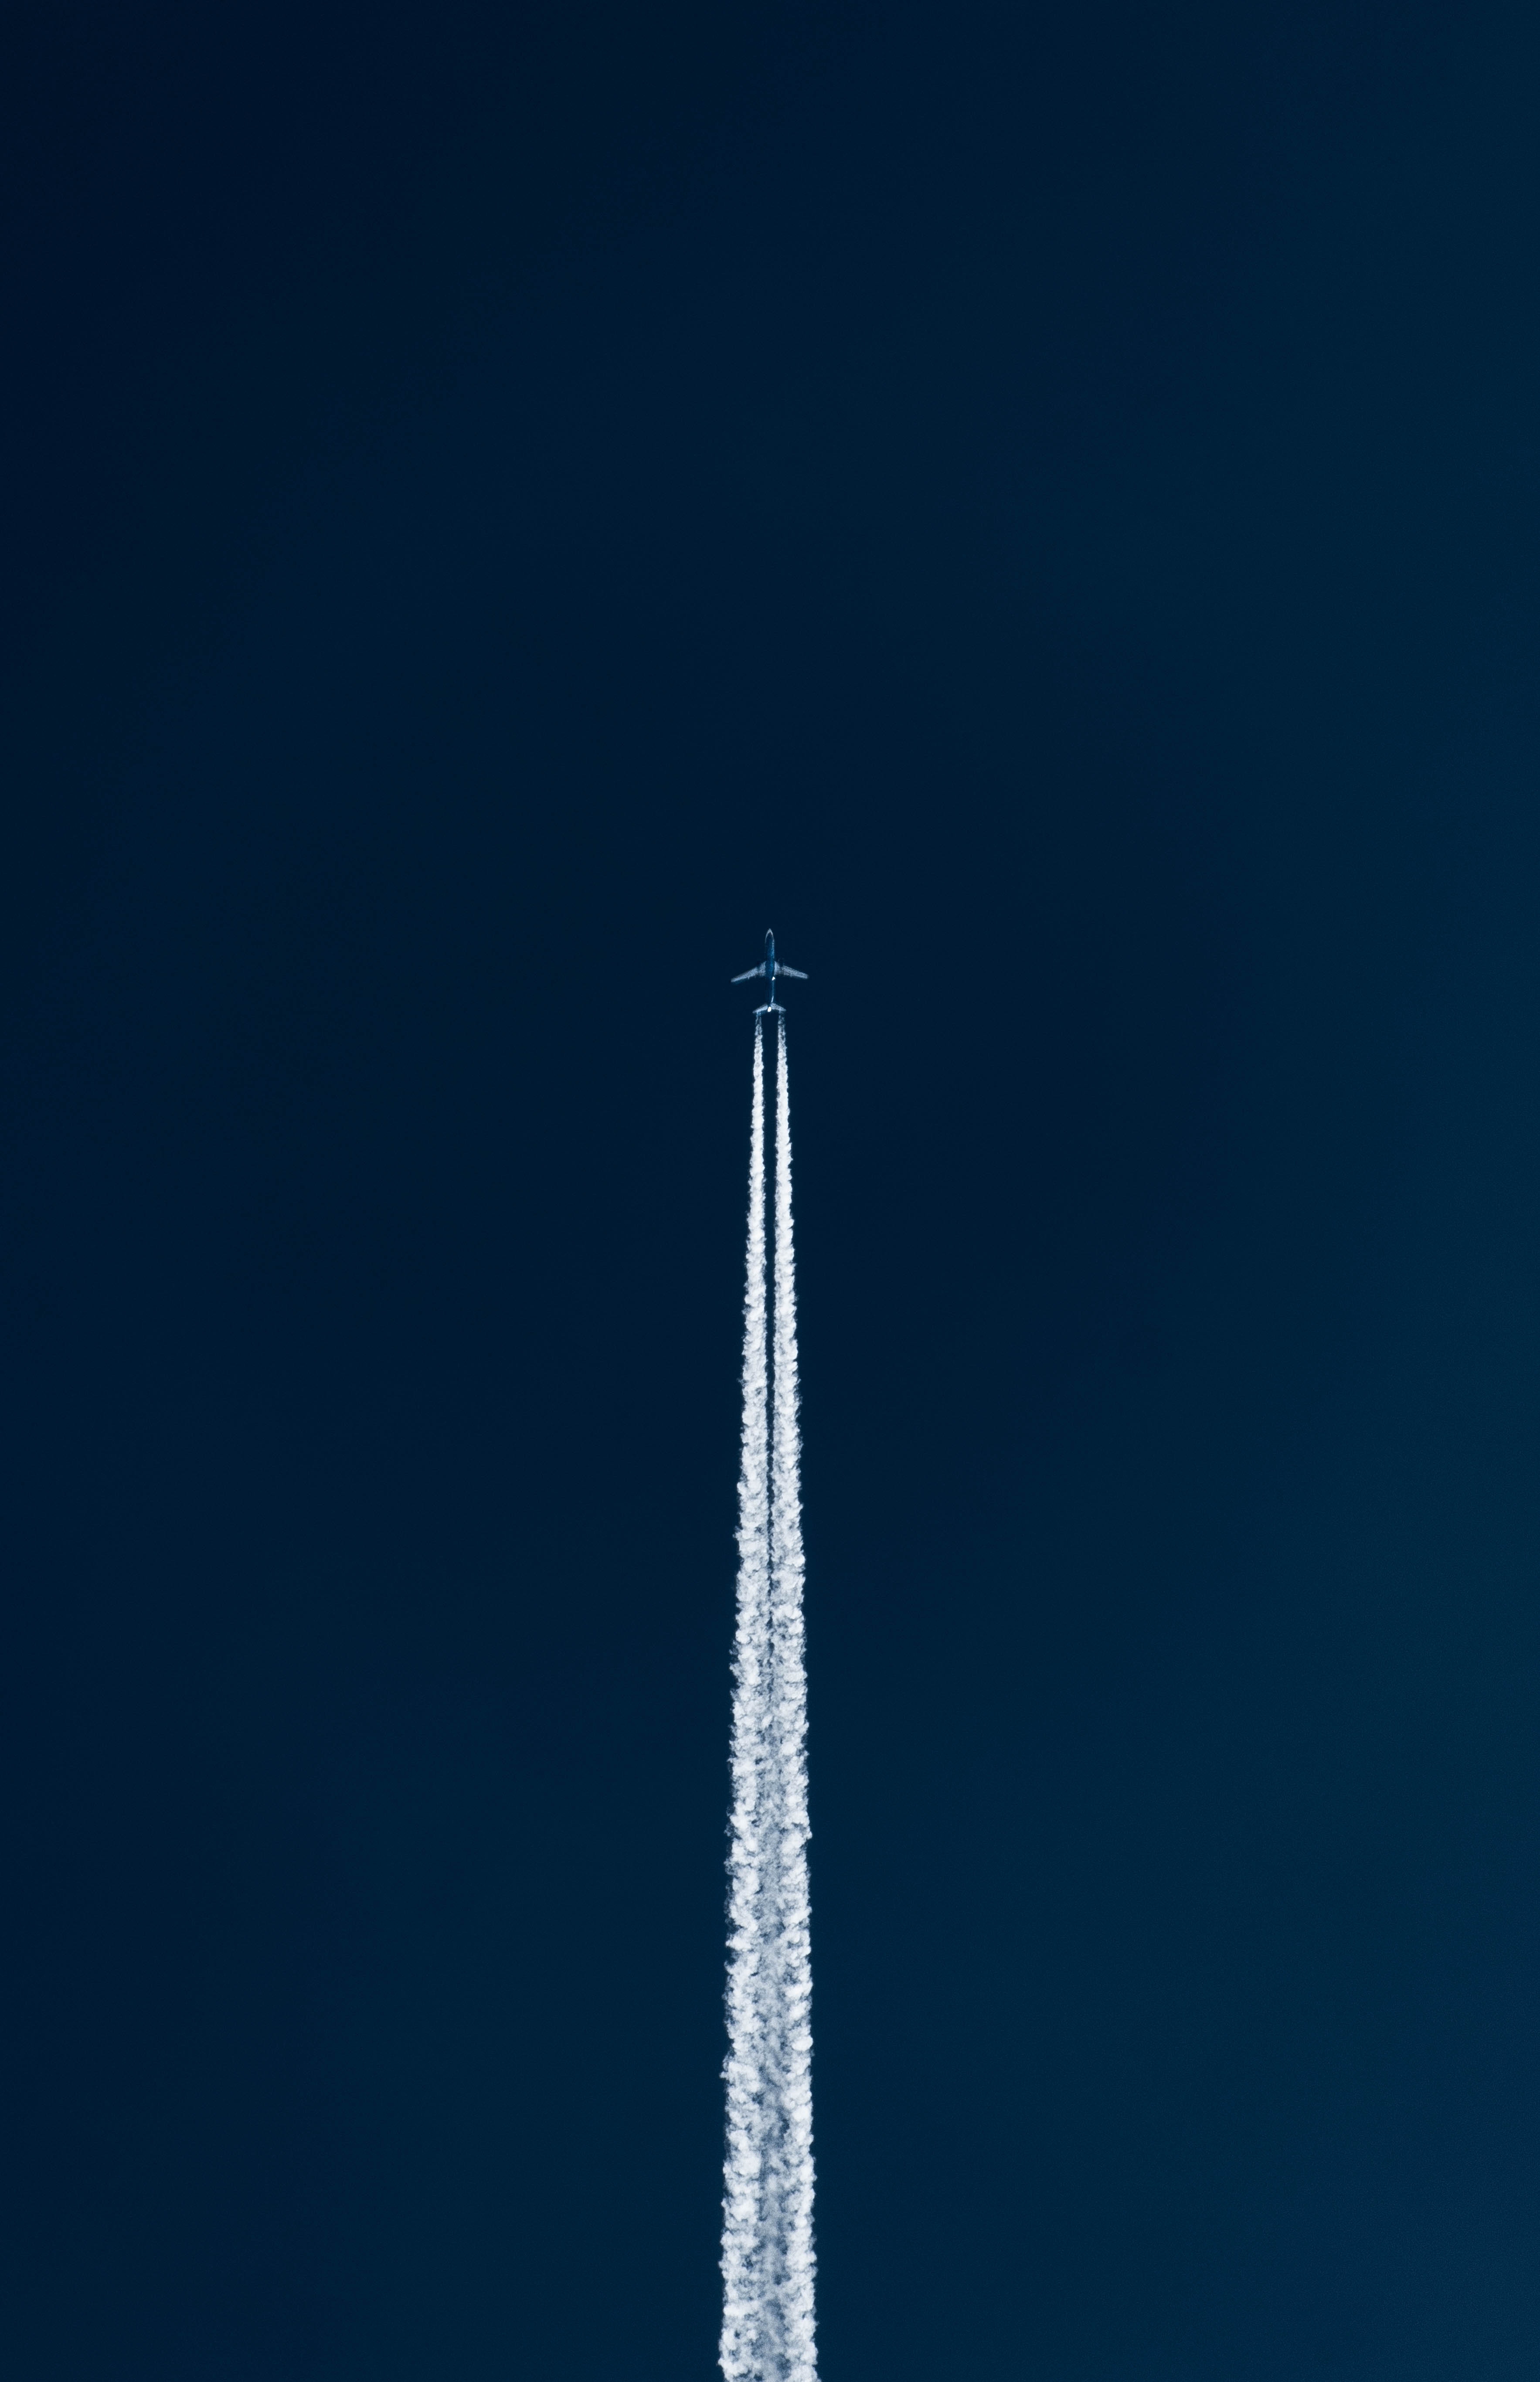 Wallpaper for mobile devices track, airplane, sky, flight